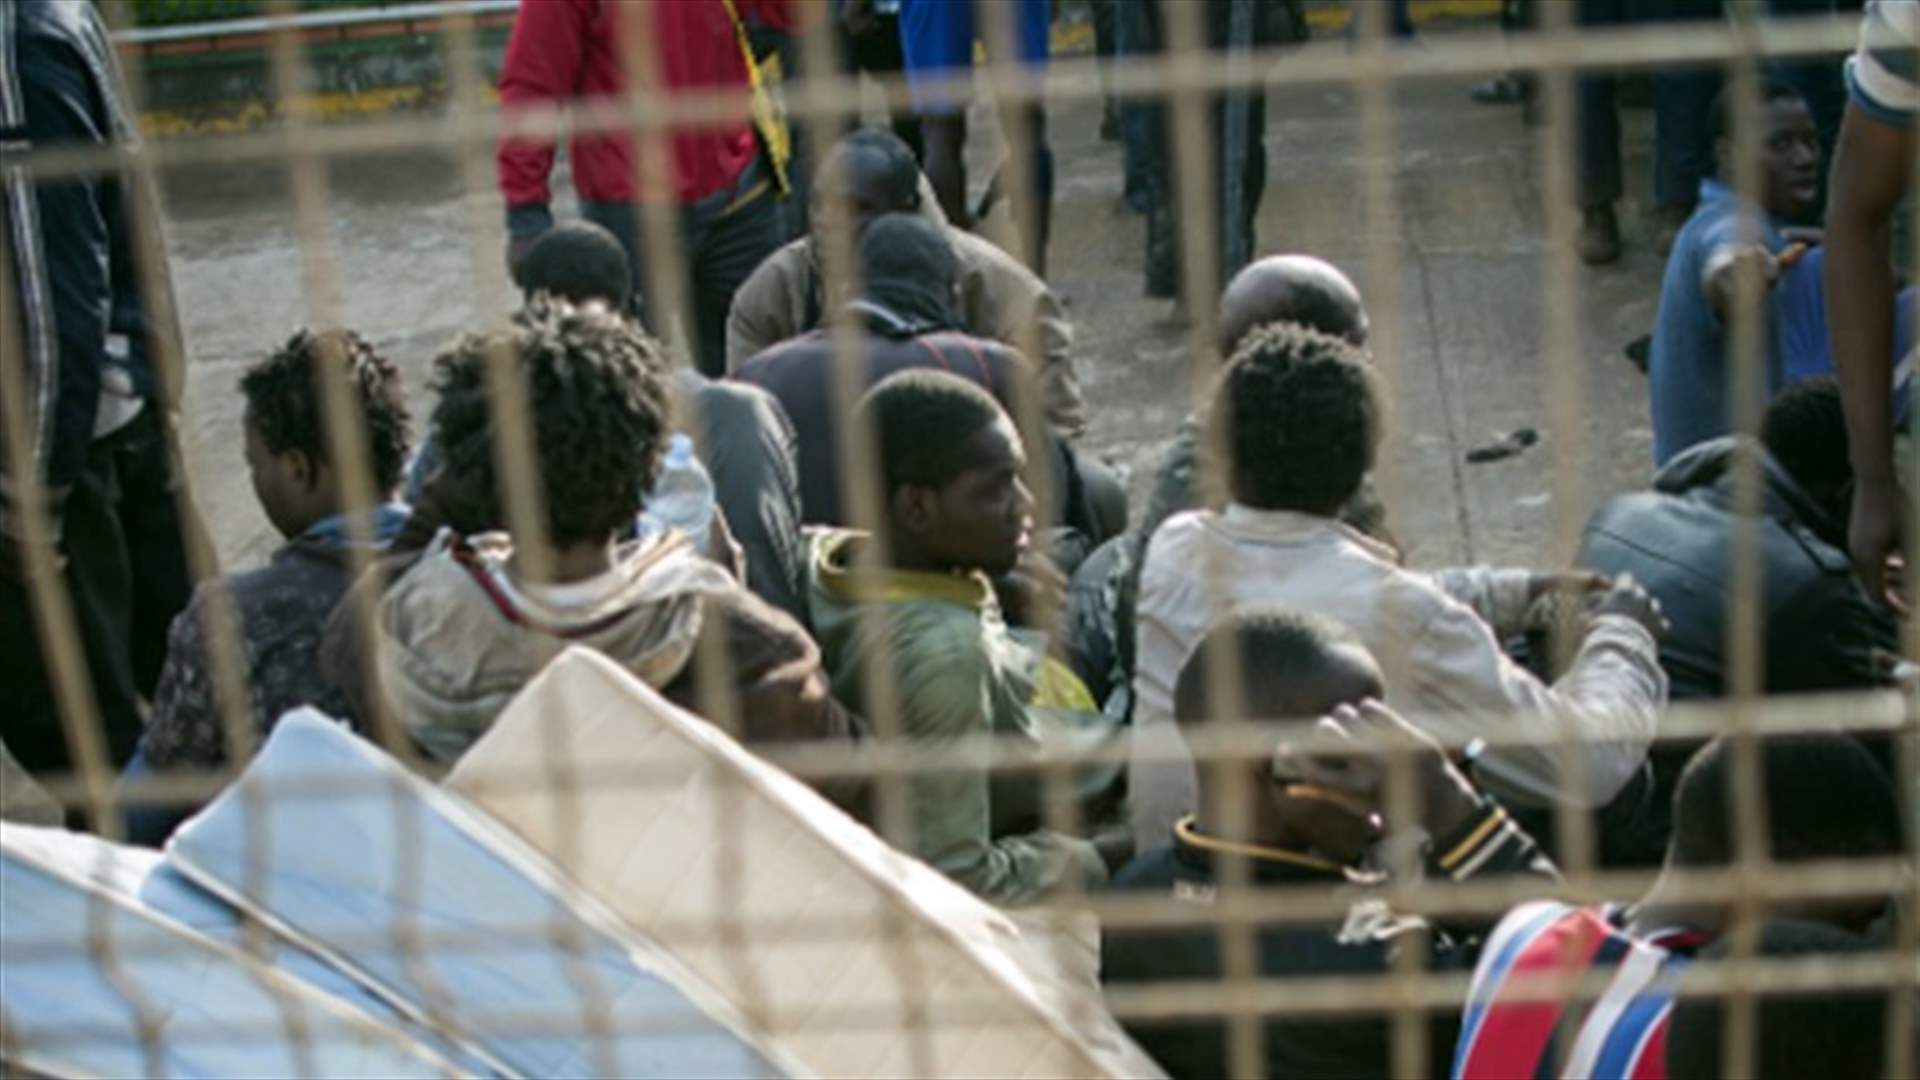 Hundreds of migrants try to storm border into Spain&#39;s enclave of Ceuta